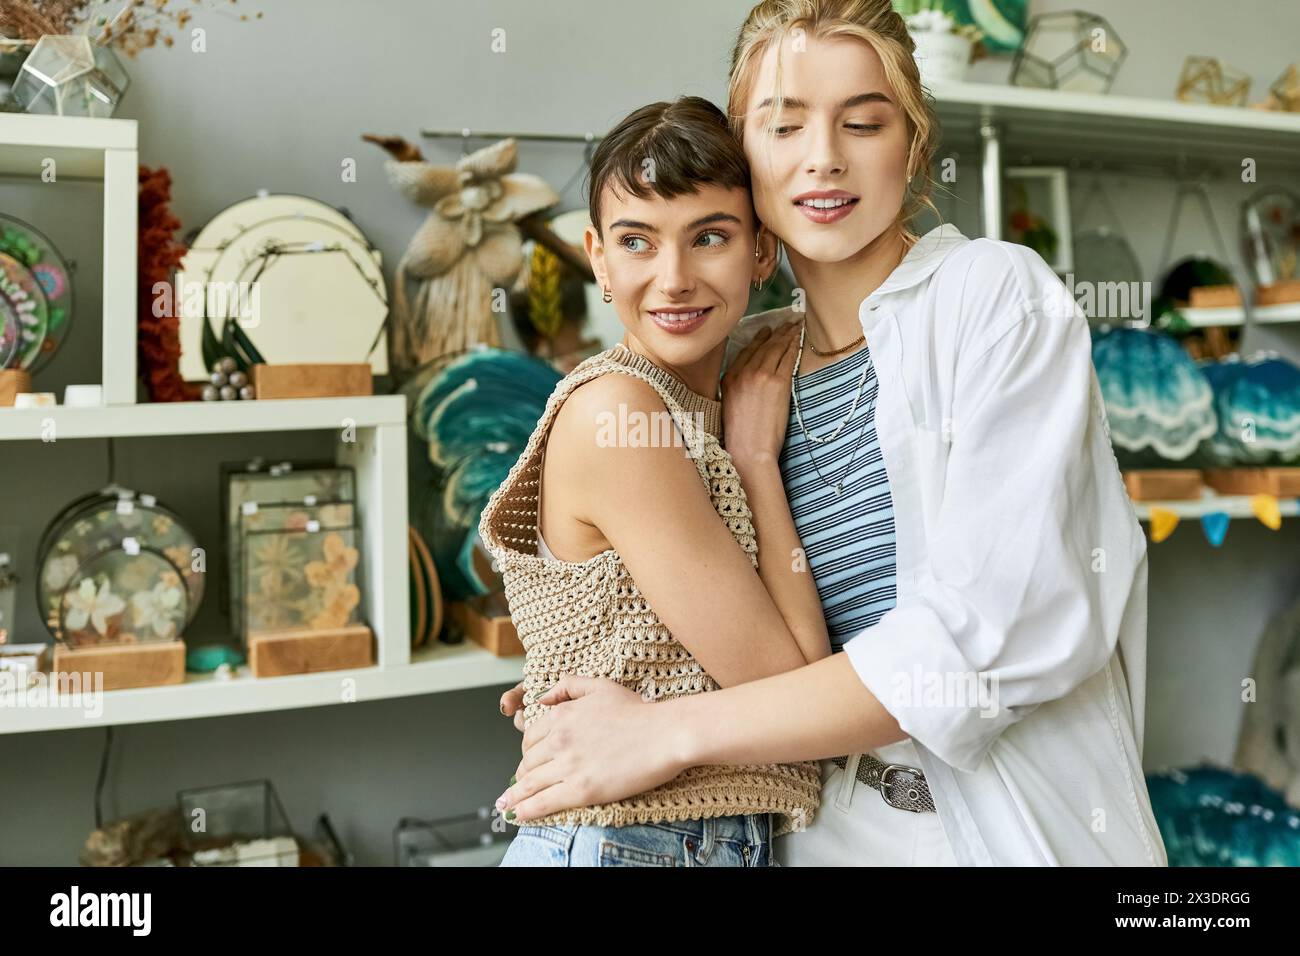 A loving lesbian couple, two women, standing in an art studio with a tender connection. Stock Photo